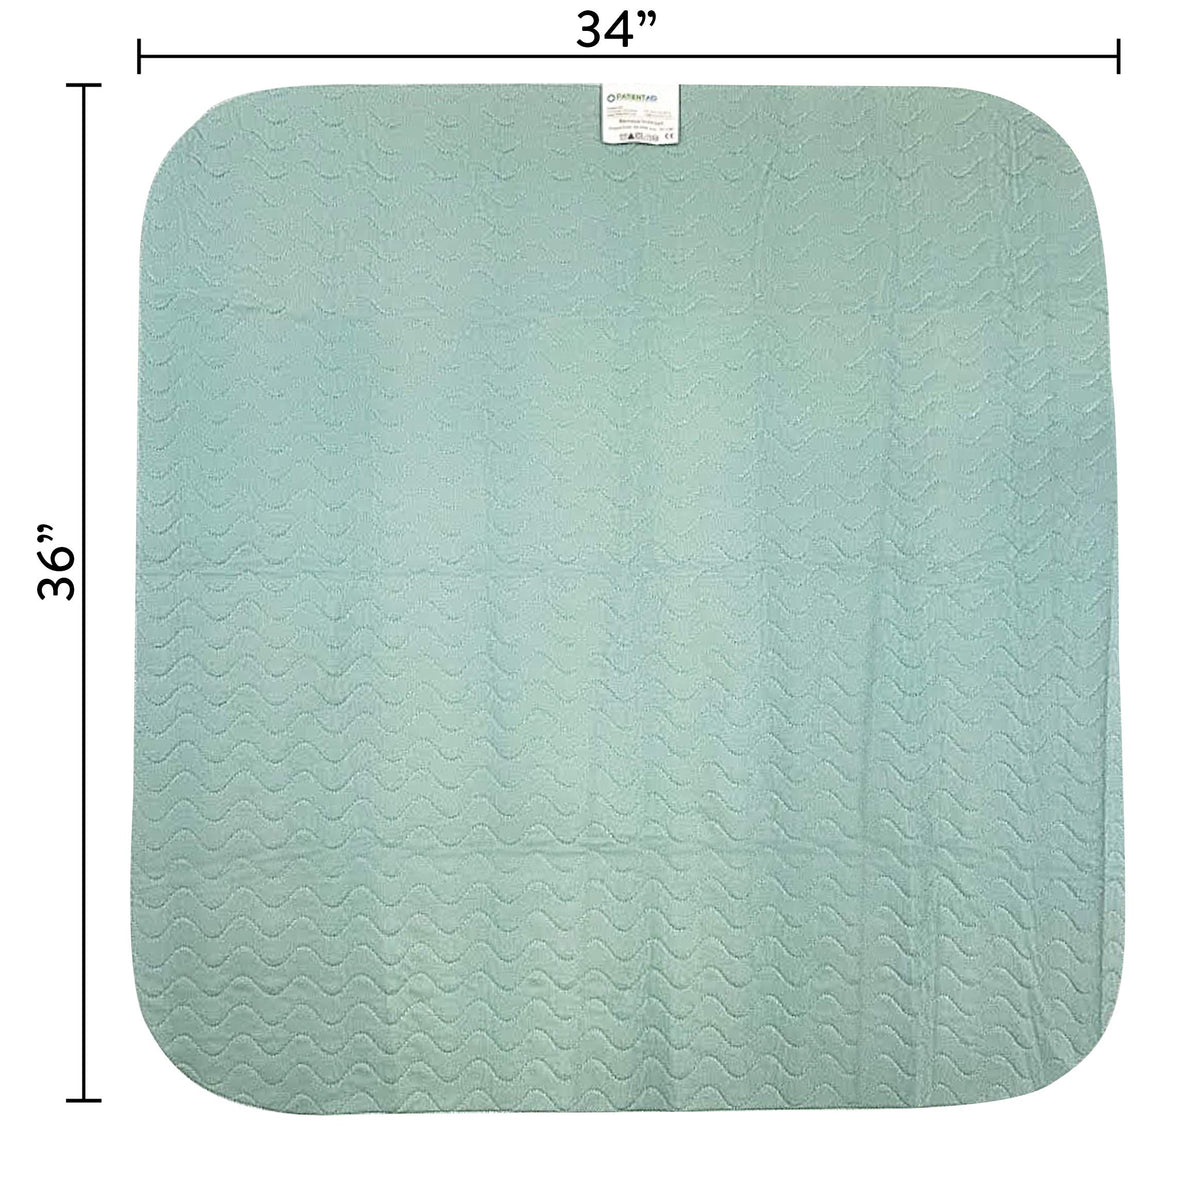 Positioning Reusable Bed Pad Without Handles 34 x 36 / 2 Pack